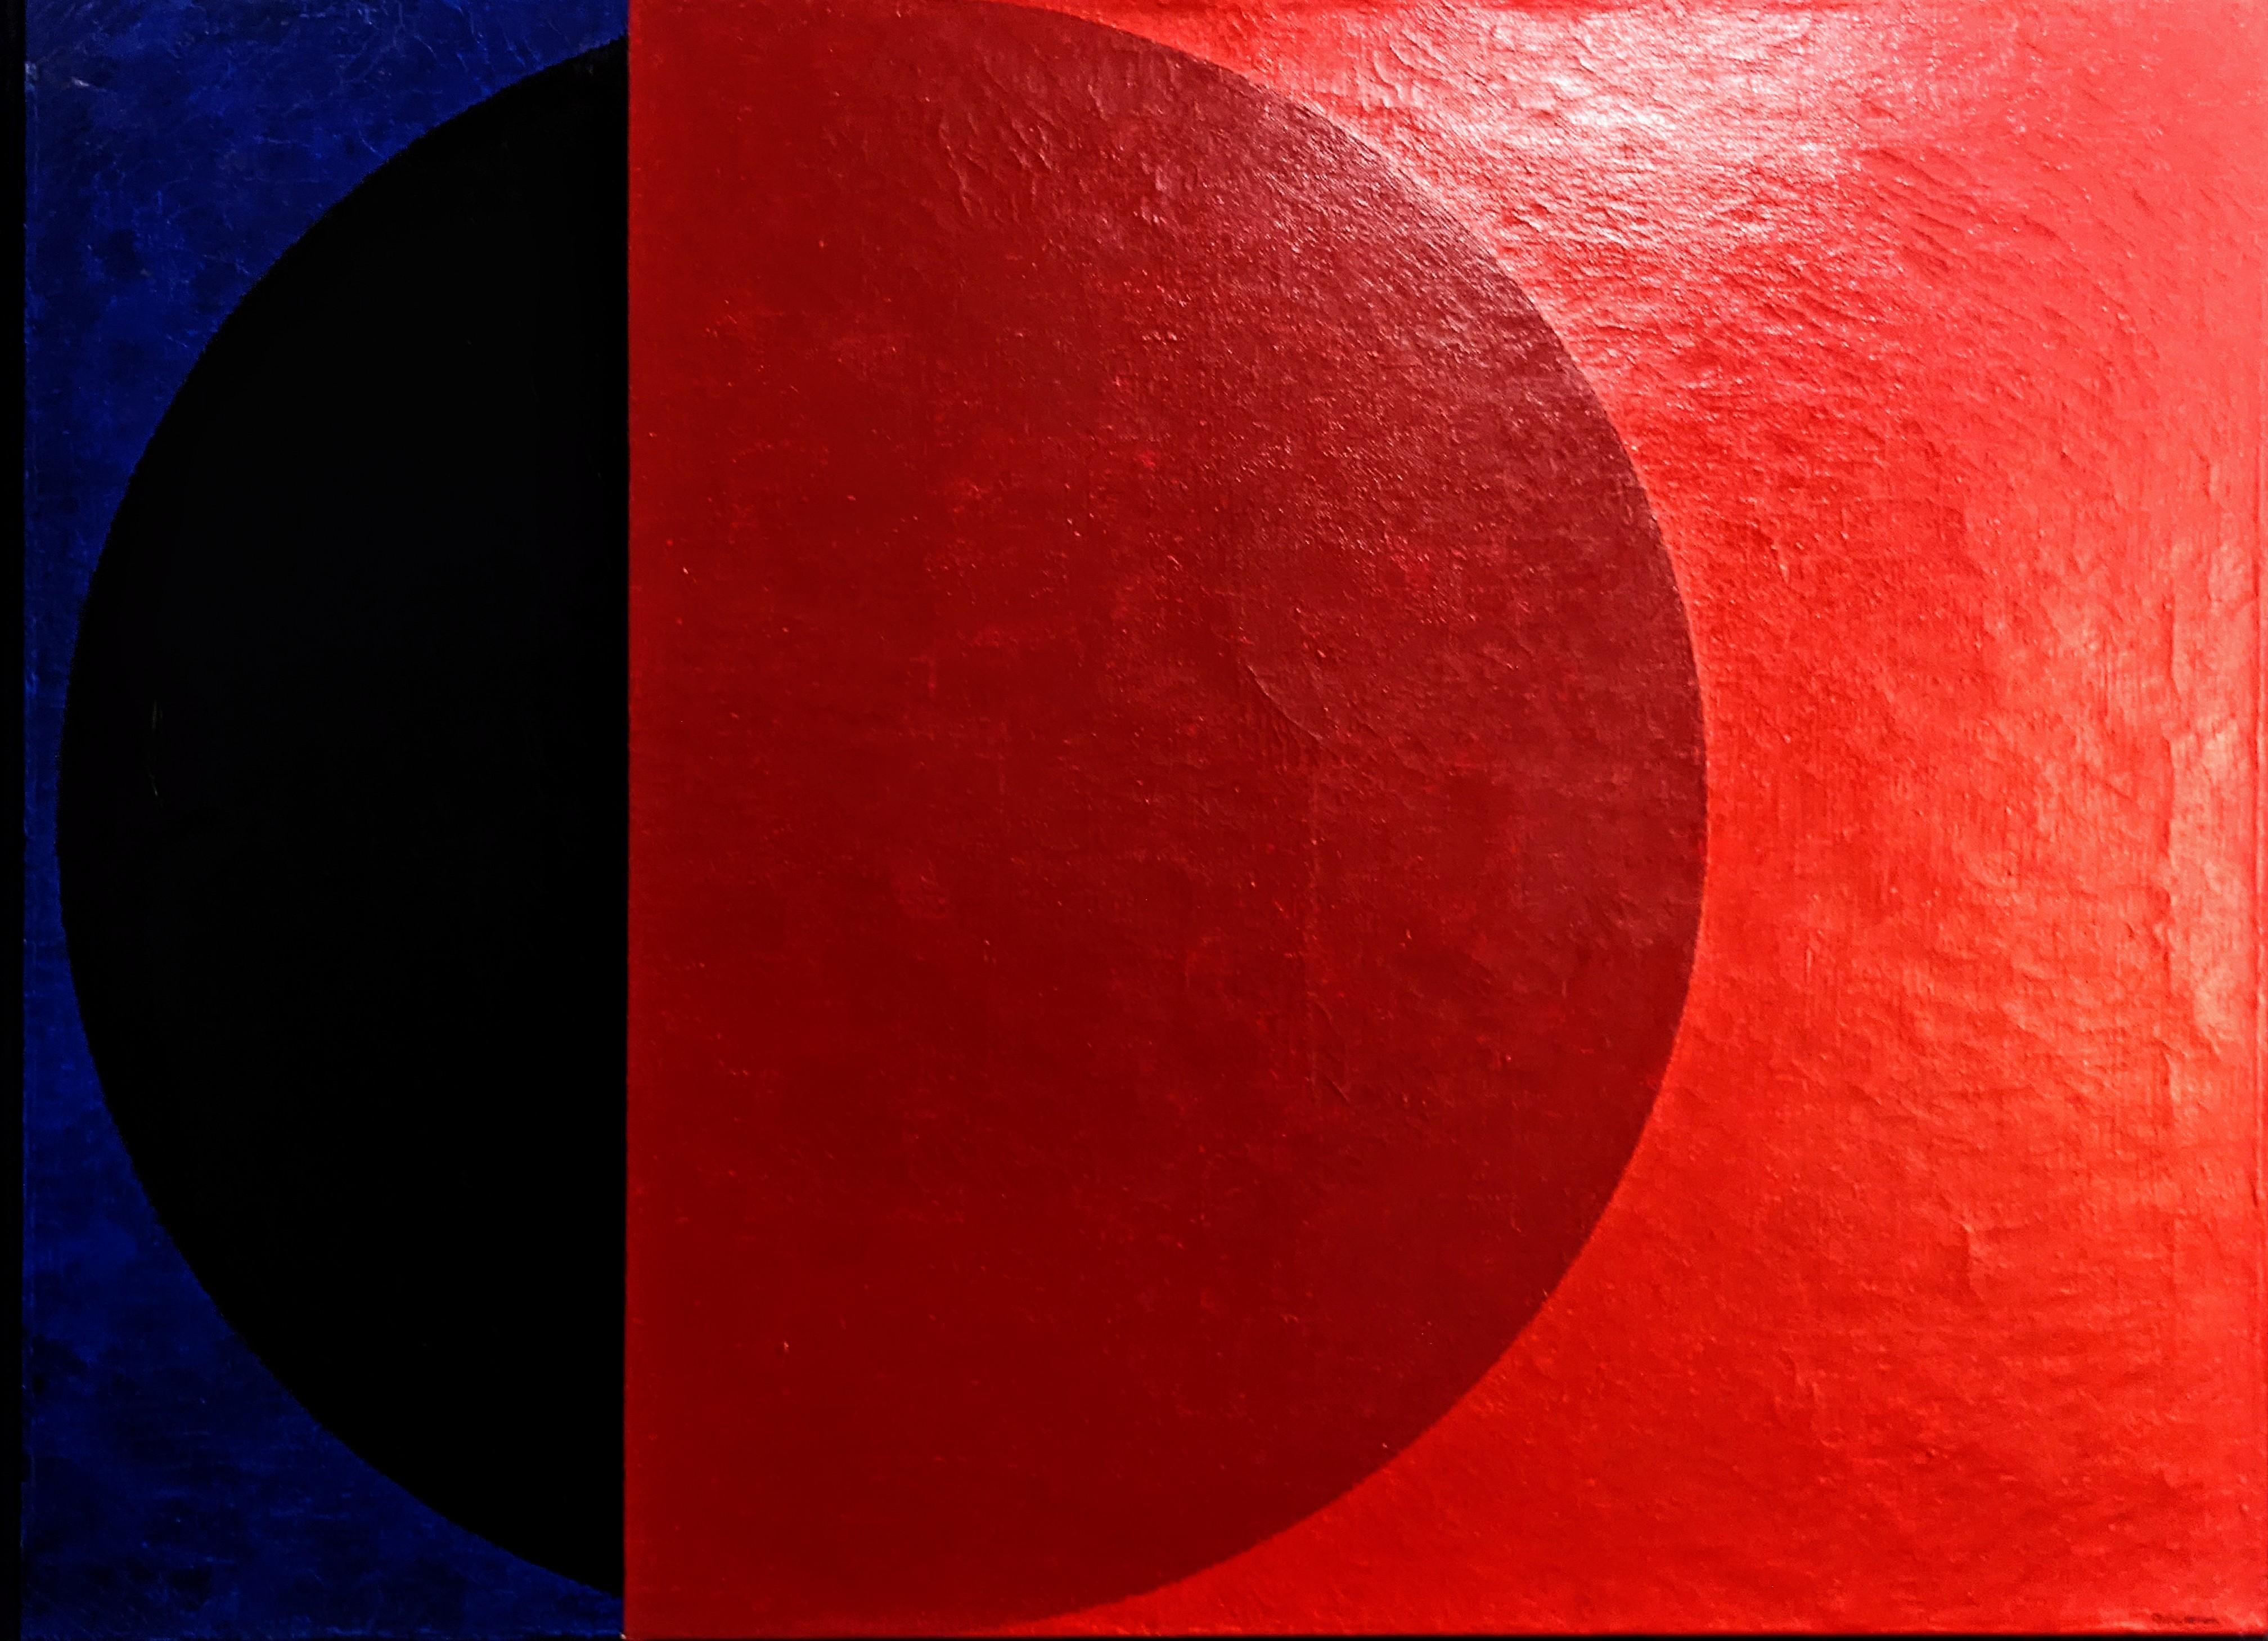 "The Secrets in the Circle, " Oli Sihvonen, Blue and Red Hard-Edge Geometric